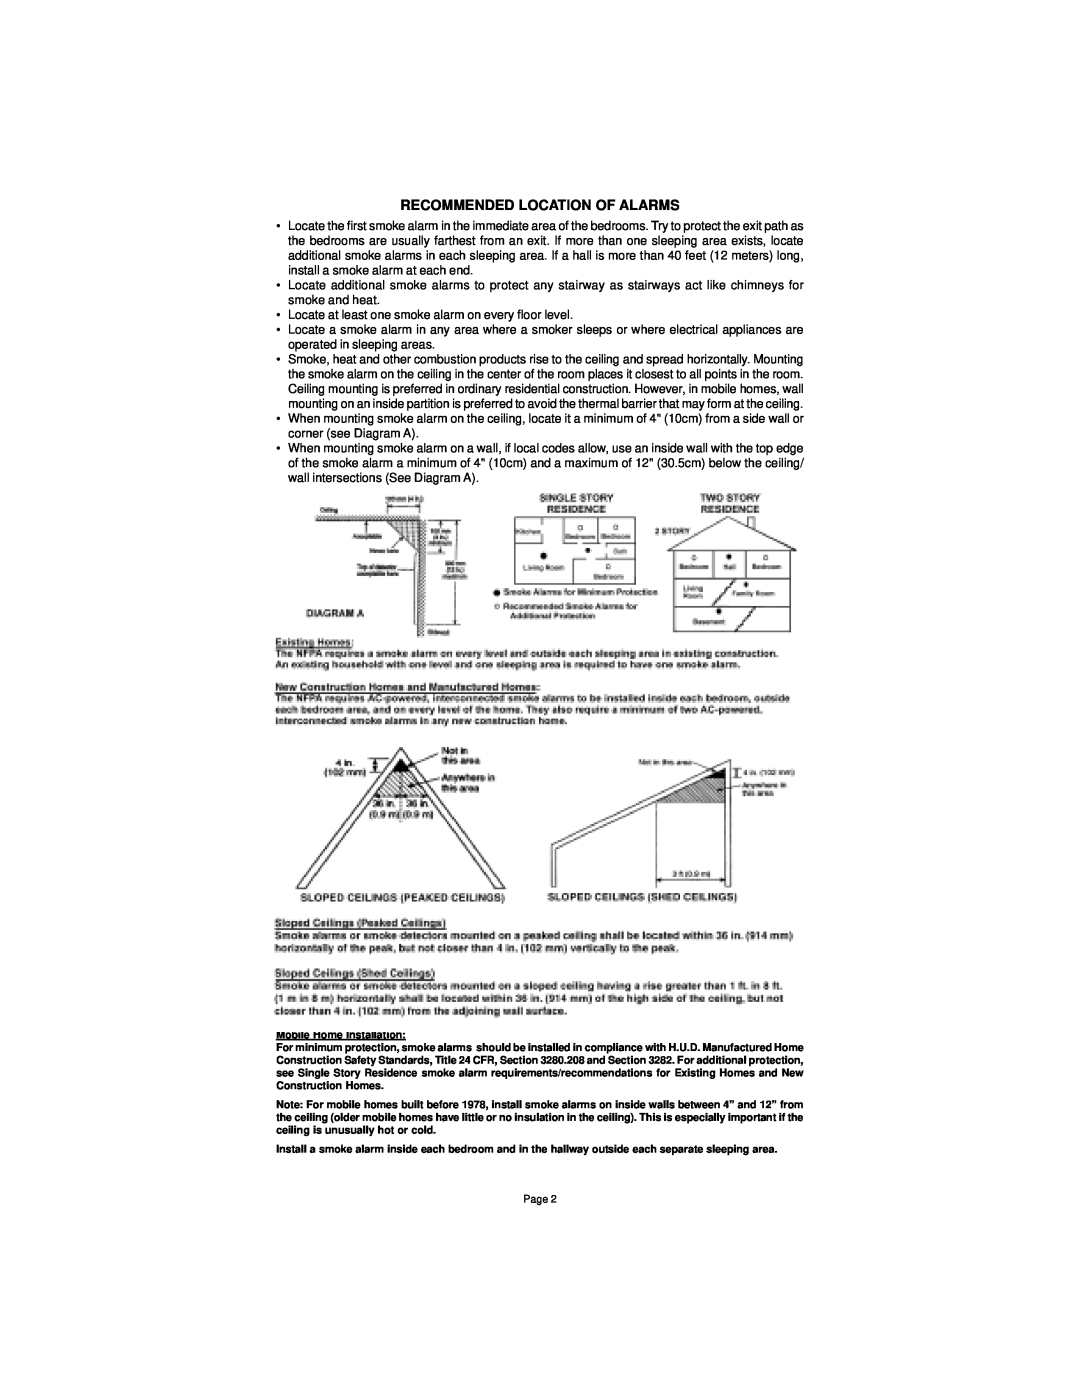 Universal SS-901 manual Recommended Location Of Alarms 